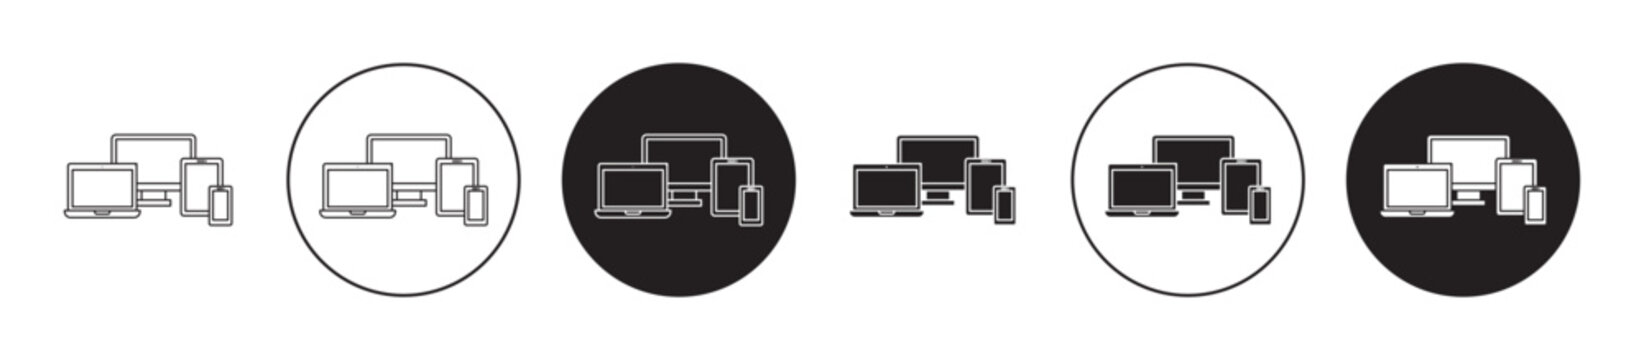 Cross platform icon set. digital multiple electronic devices vector symbol in black filled and outlined style.